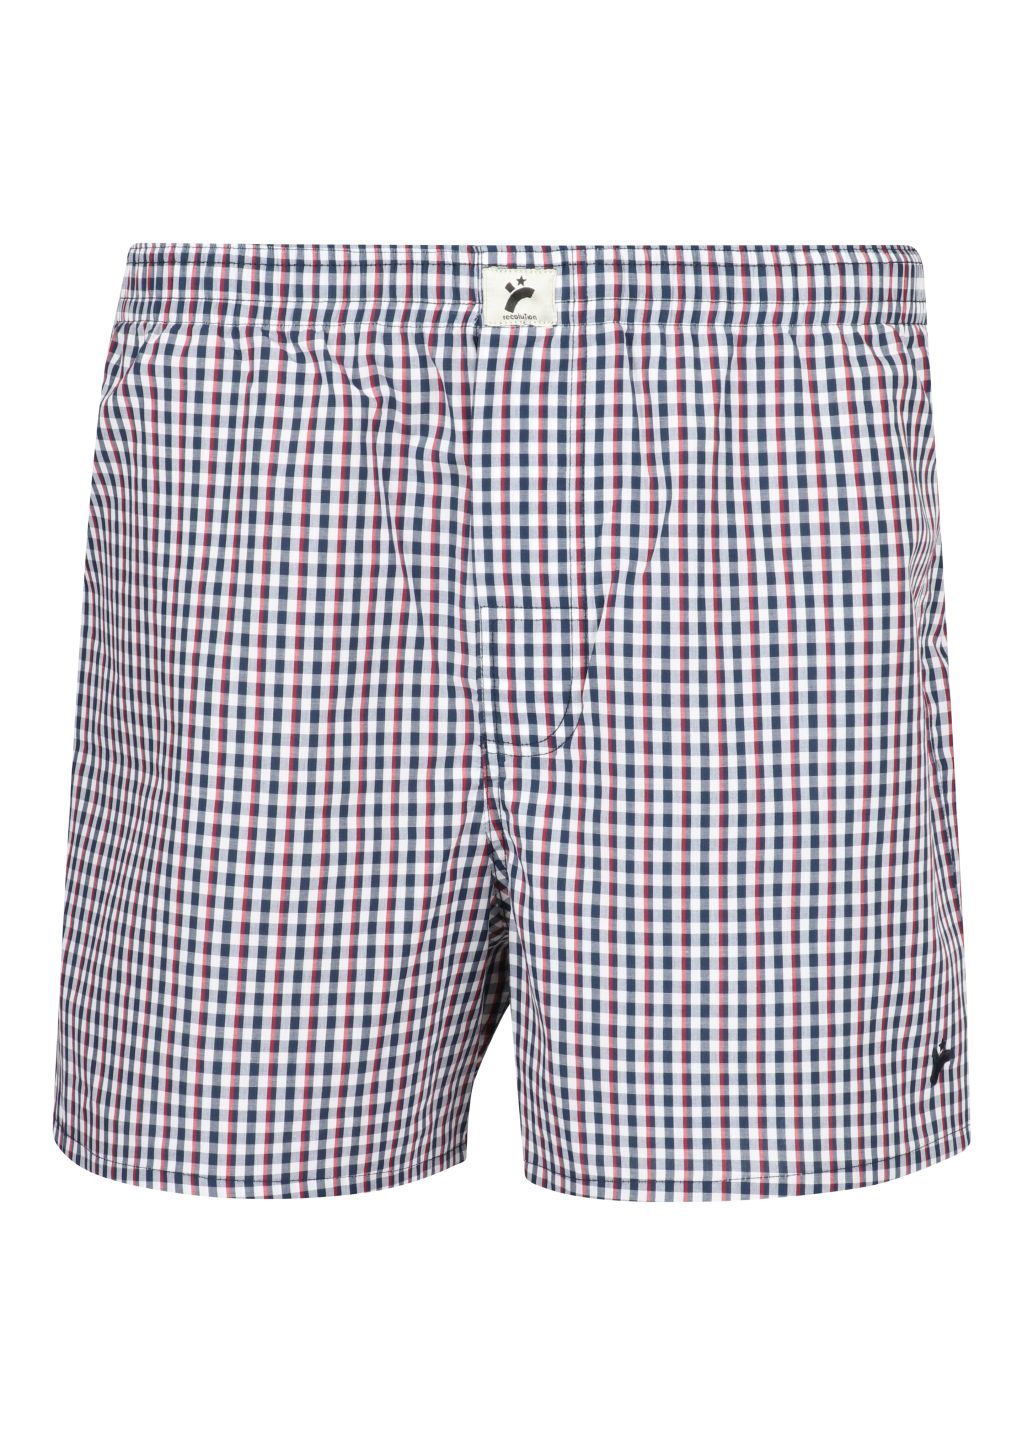 Männer Boxershorts #CHECKED navy/red/white L